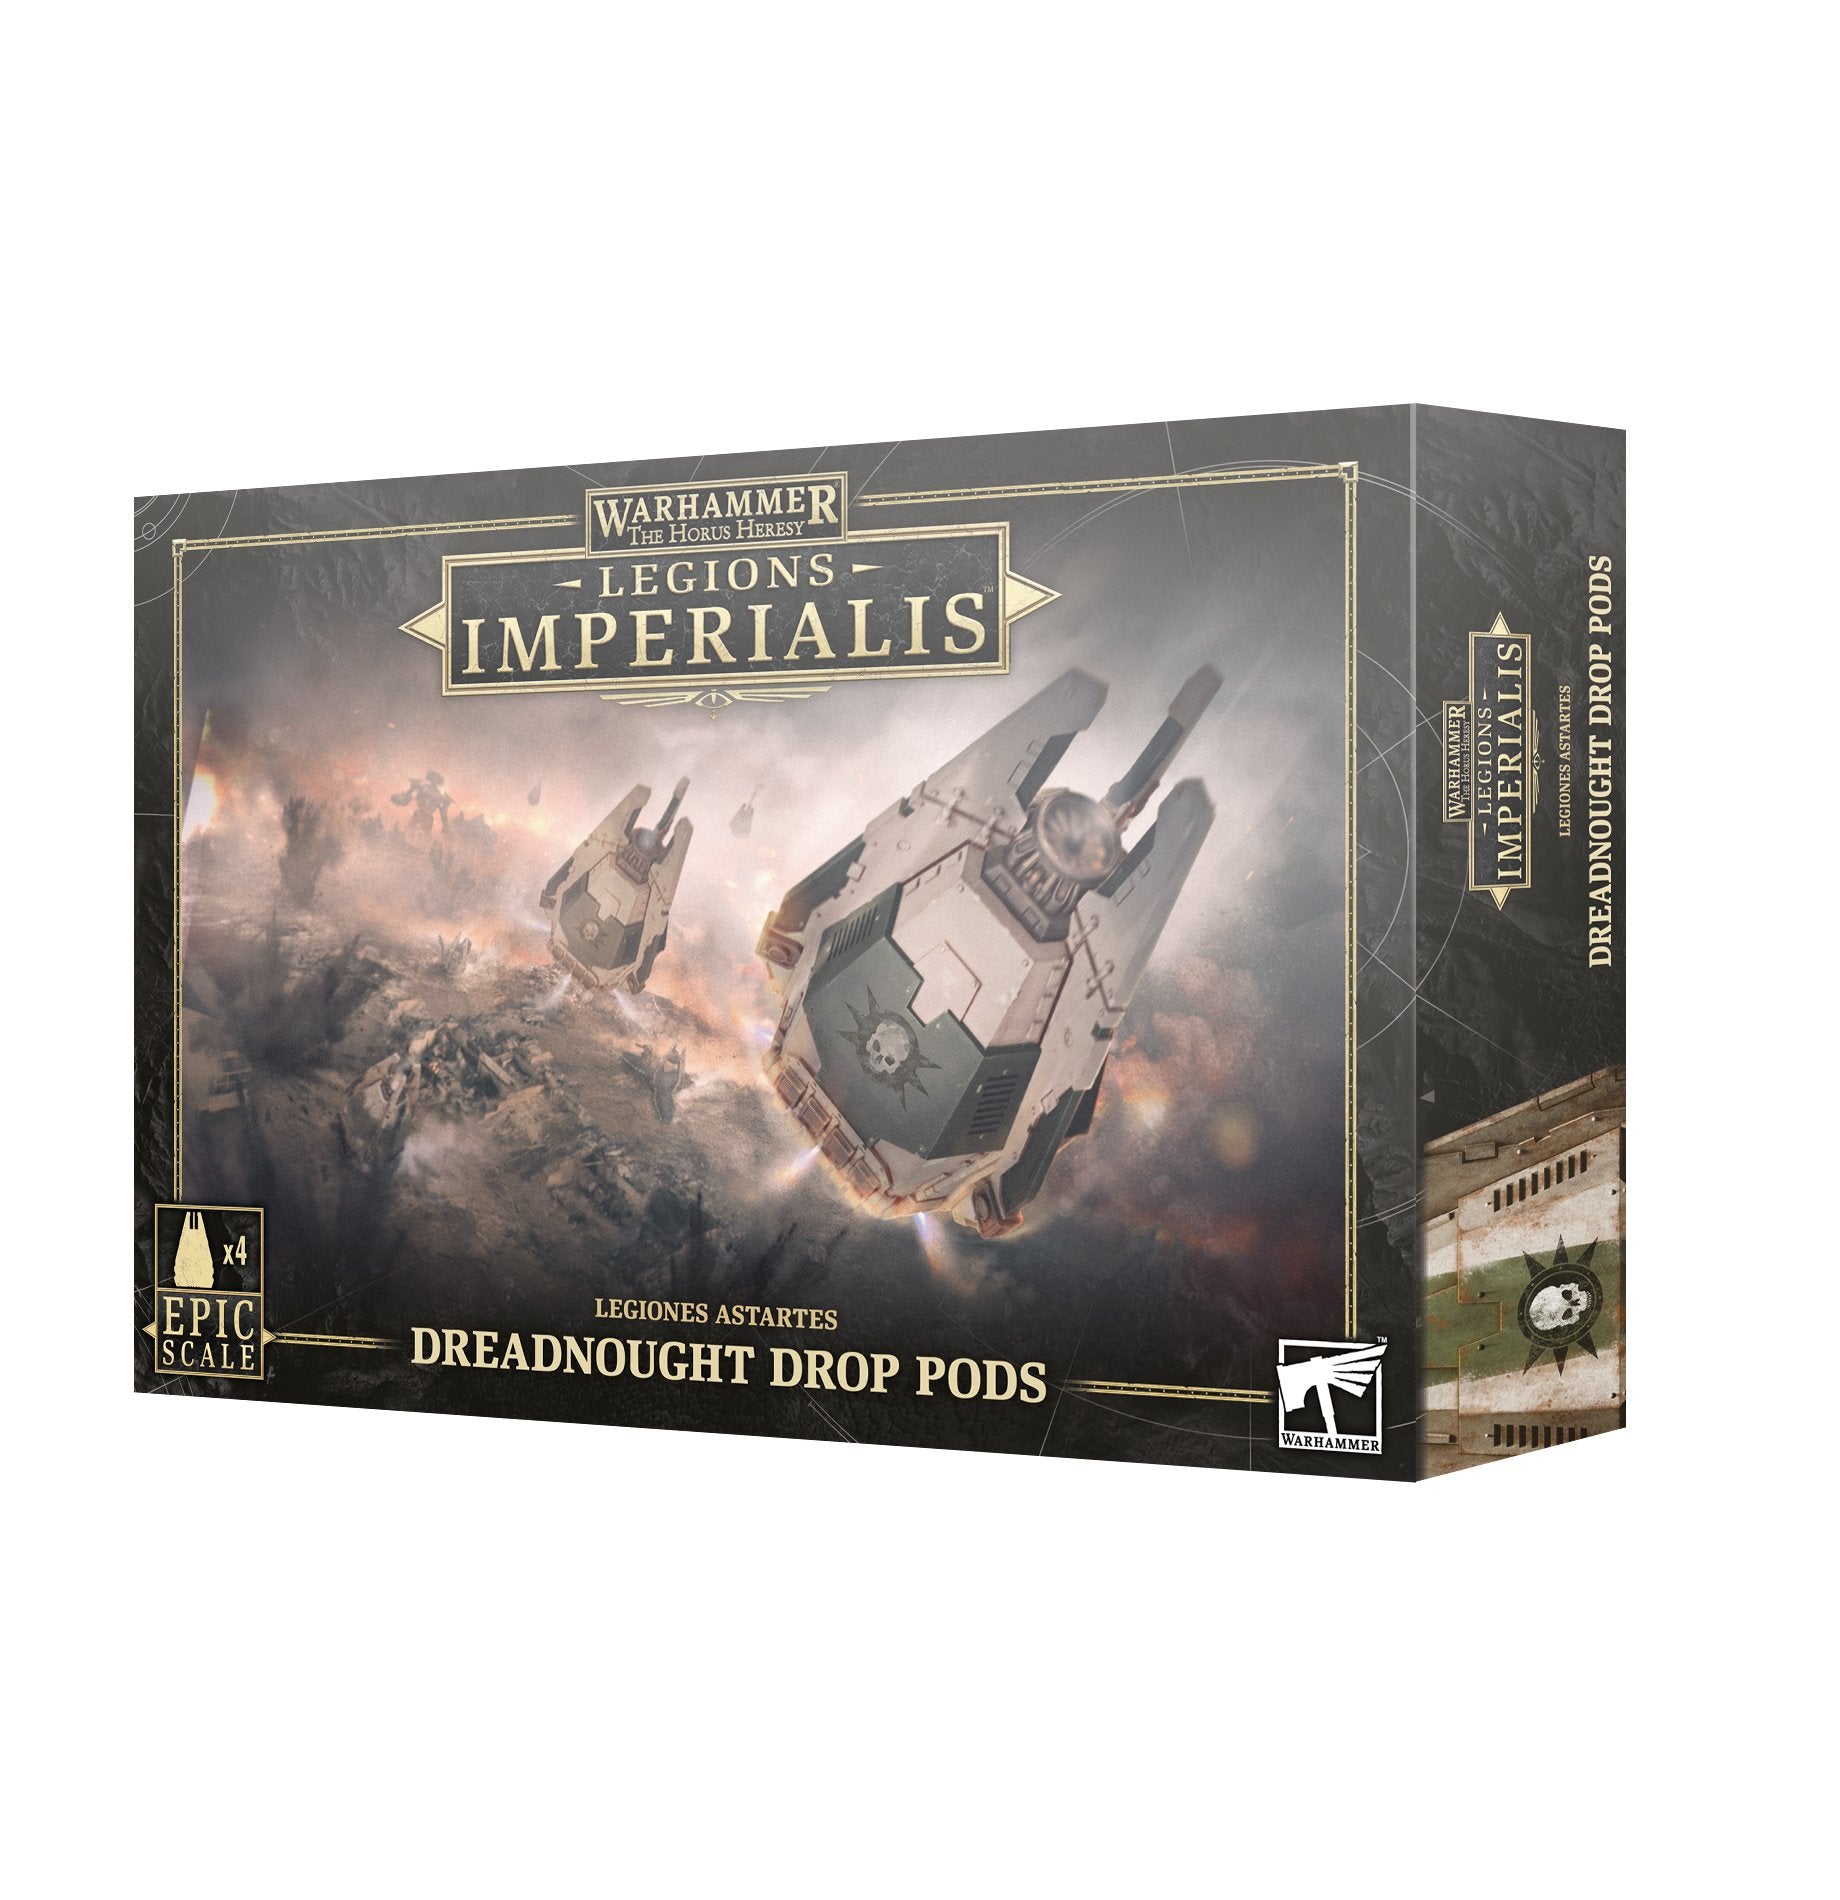 Legions Imperialis: Dreadnought Drop Pods [May 18]